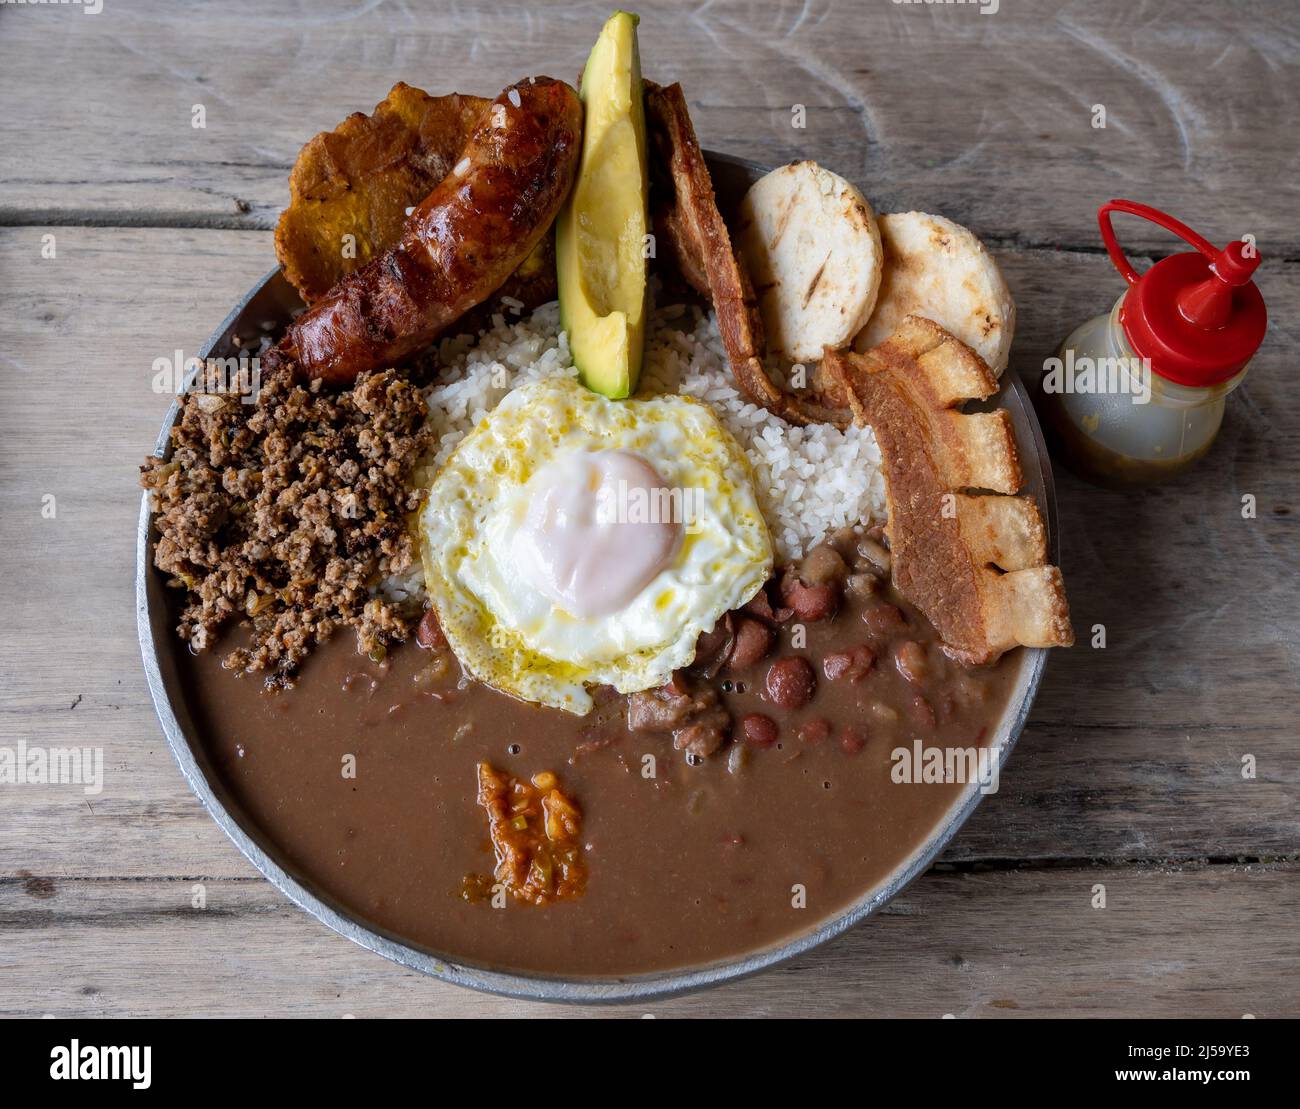 Bandeja paisa, a typical Colombian dish with rice, beans, plantain, chorizo, meat and a fried egg. Colombia, South America. Stock Photo